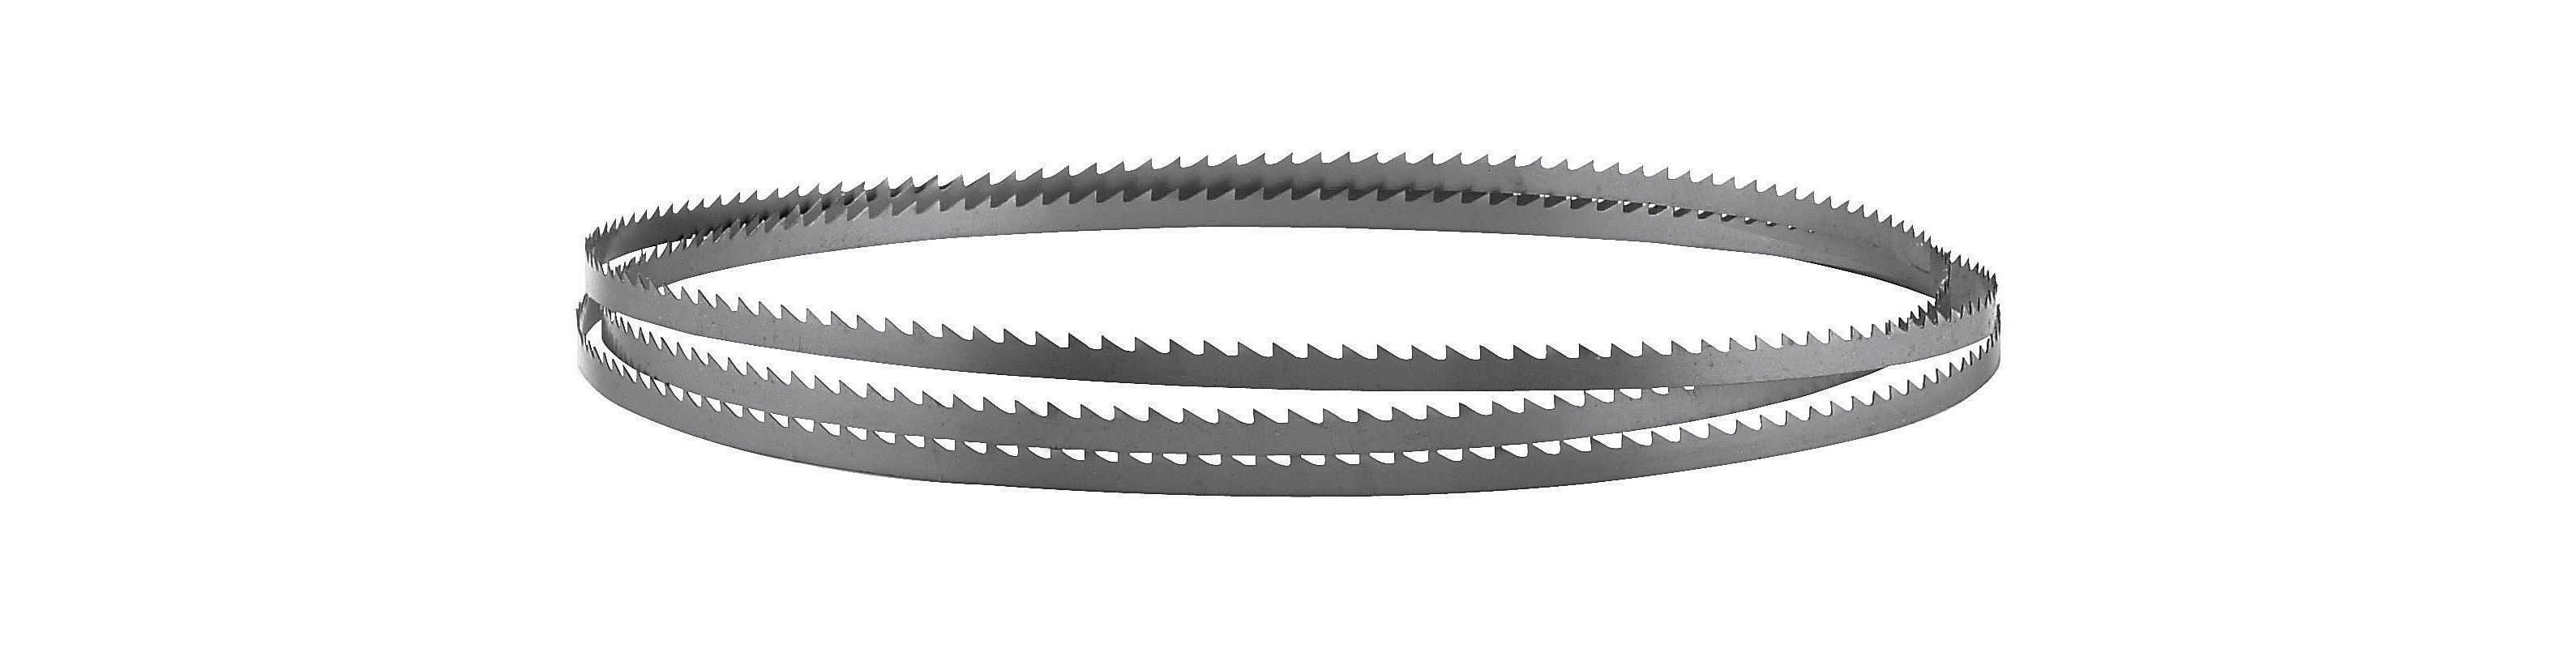 Vermont American 31205 1\/4 x 6TPI x 70 Carbon Steel Band Saw Blade